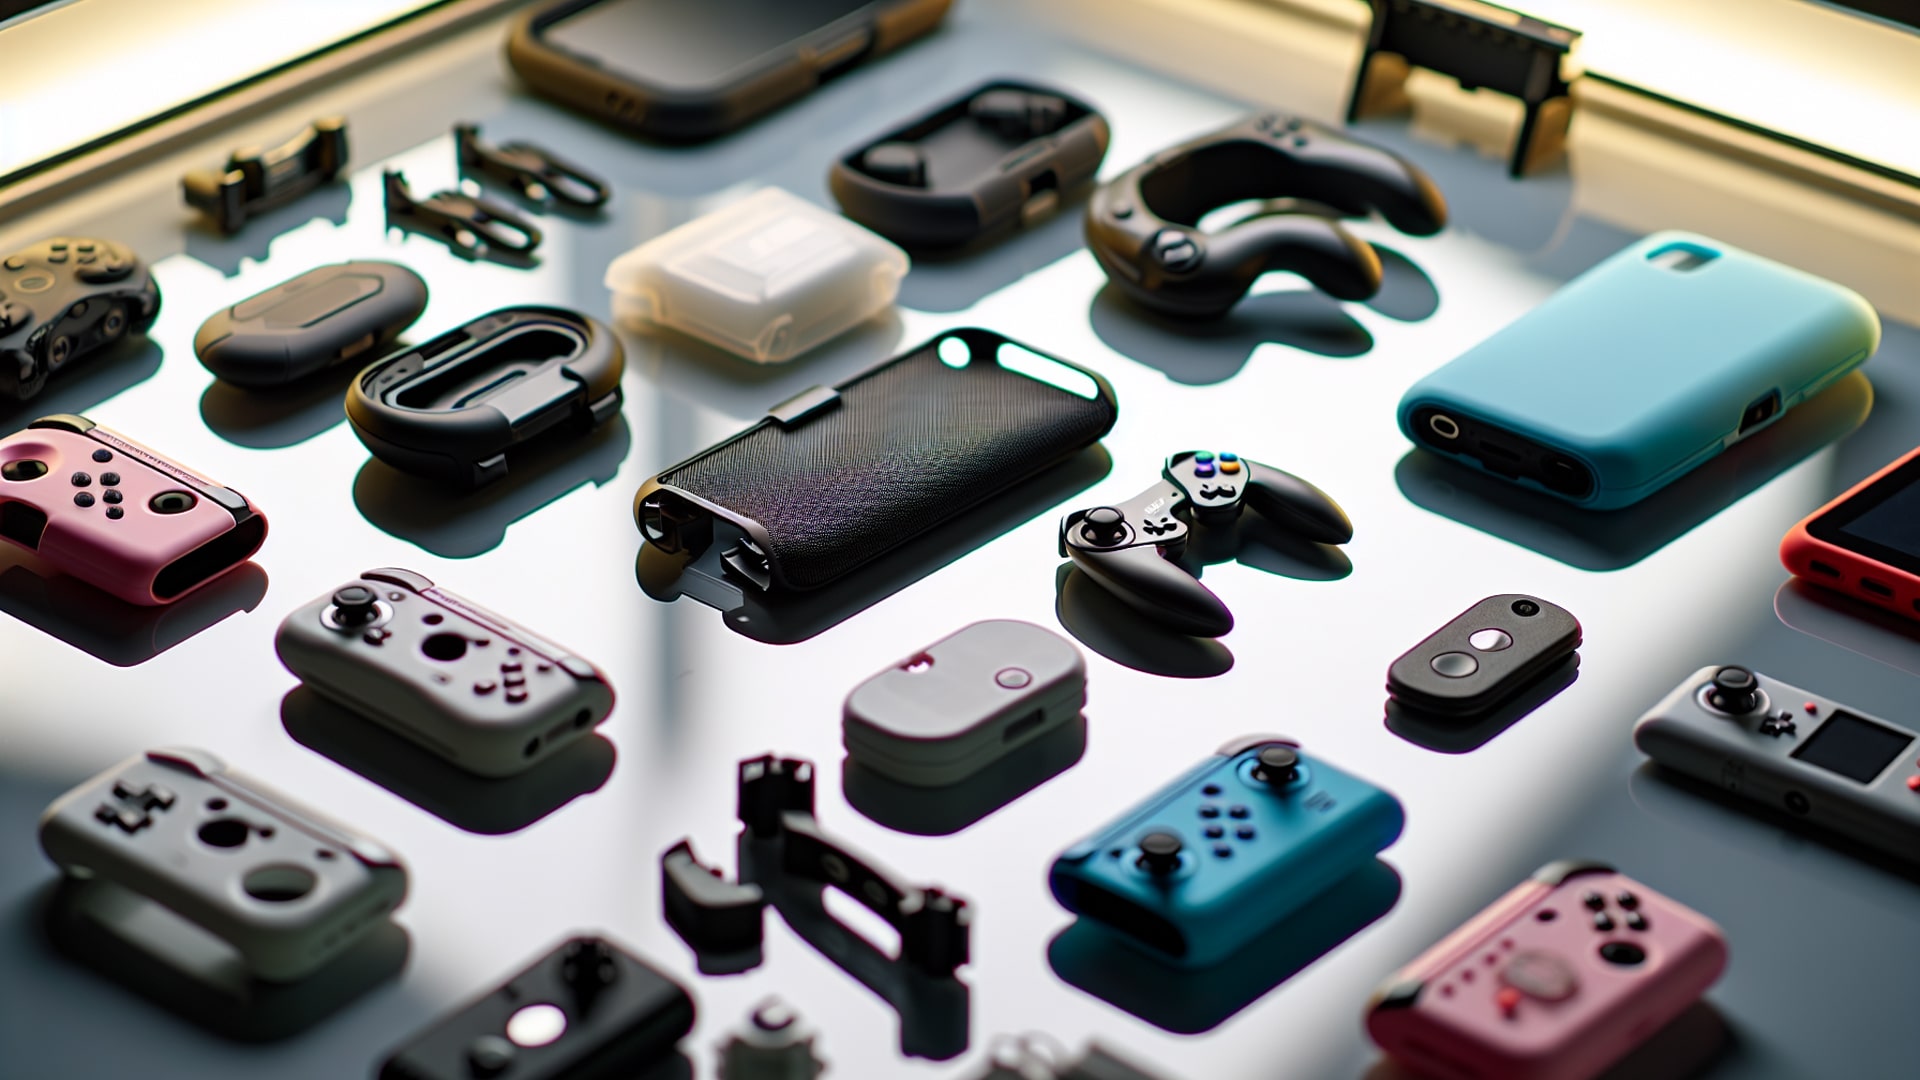 Array of Wiiboy Advance accessories showcasing controllers, adapters, and more